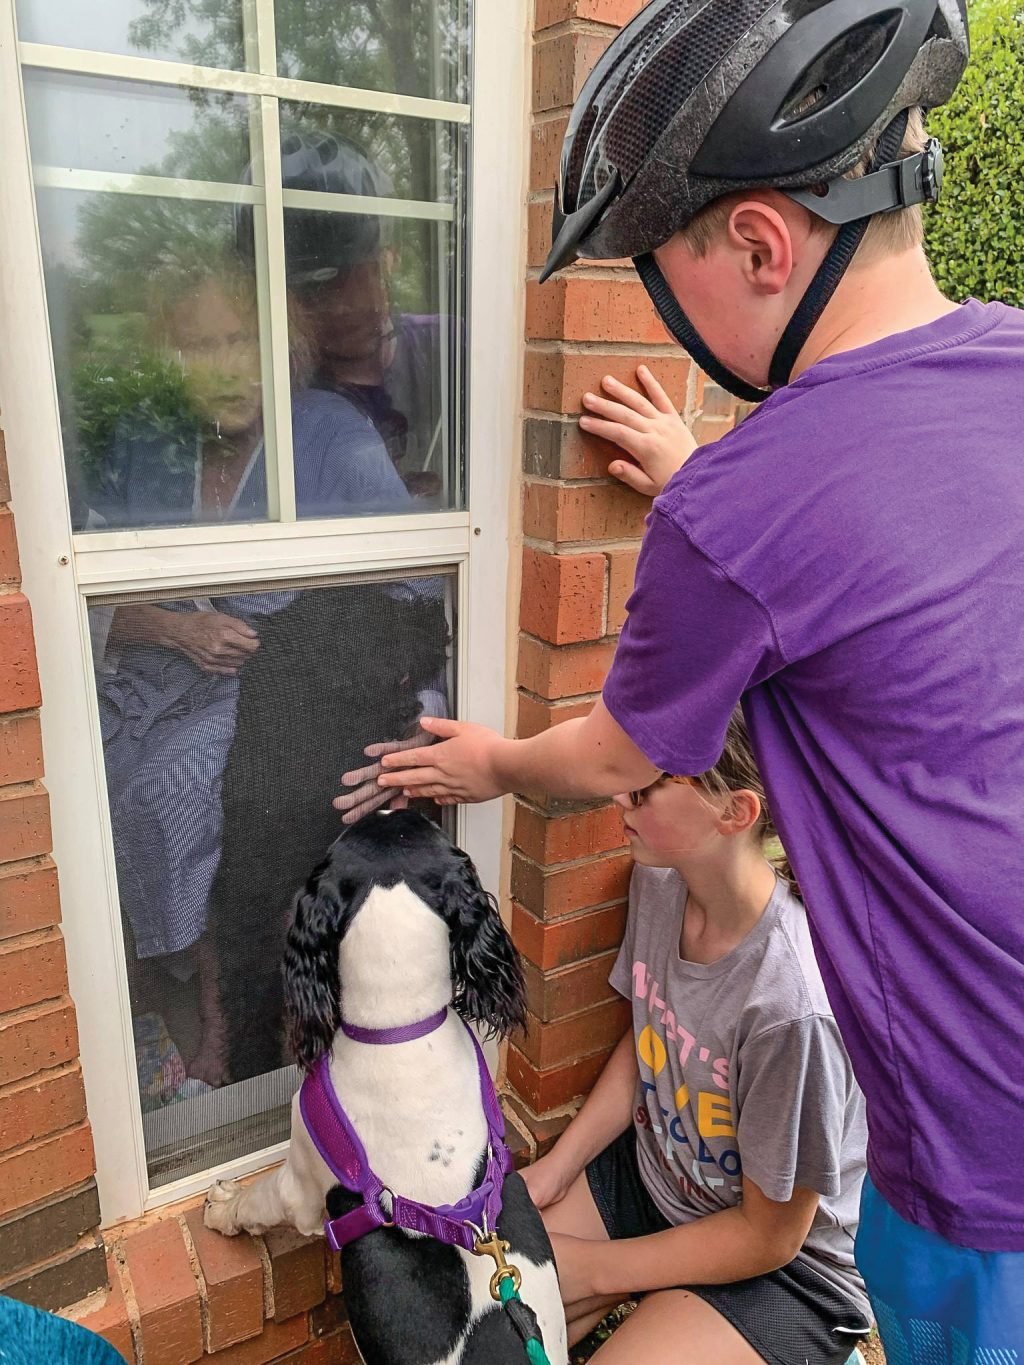 Knox Watson and his grandmother, Judy Forrester, press their hands against a window at Tealridge, an independent living facility in Oklahoma City, as they say goodbye. Watson’s sister, Nora, and their dog, Mae, also came to see Forrester, 72. “She hasn’t been able to hug them since March,” said Forrester’s daughter, Amanda Watson, events coordinator for Oklahoma Christian University. “She is lonely but doing good.”